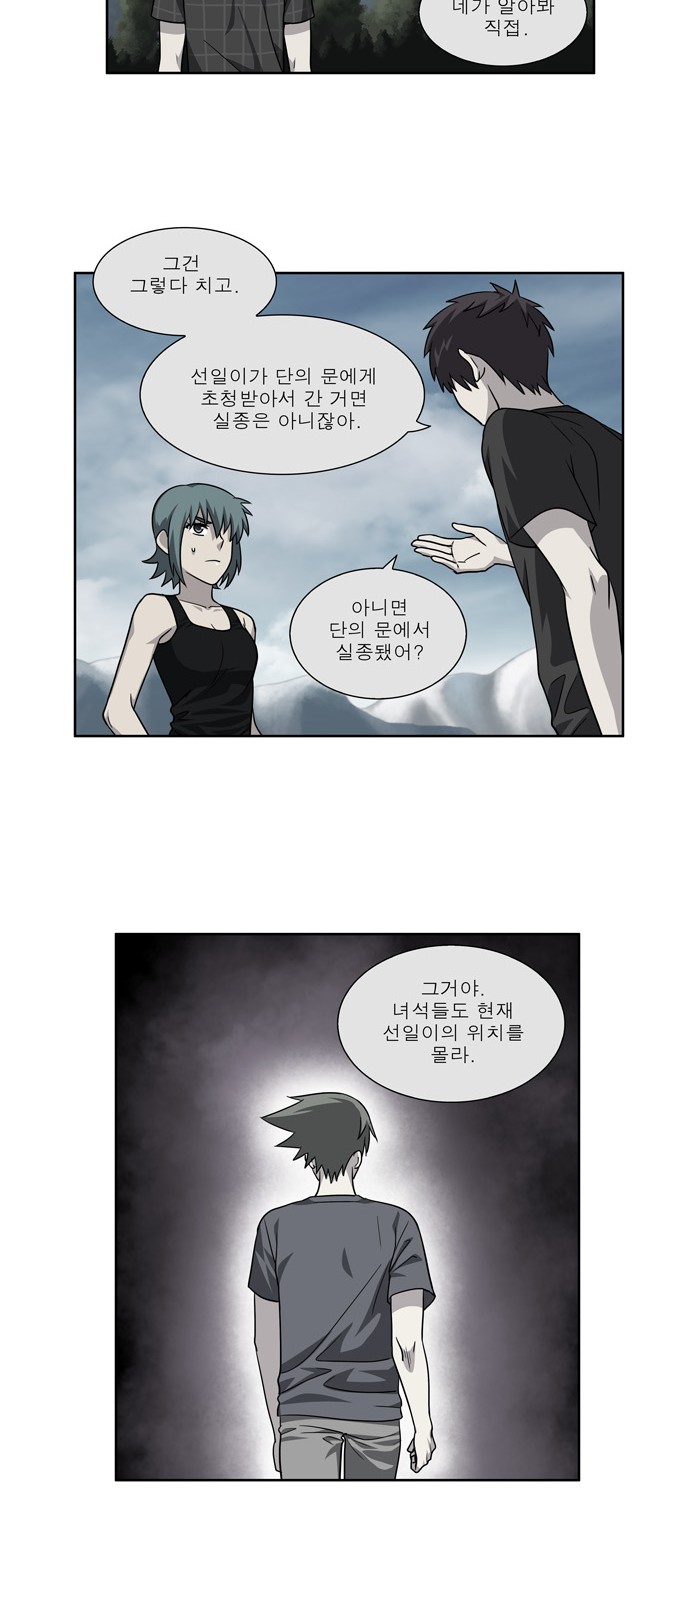 The Gamer - Chapter 249 - Page 3